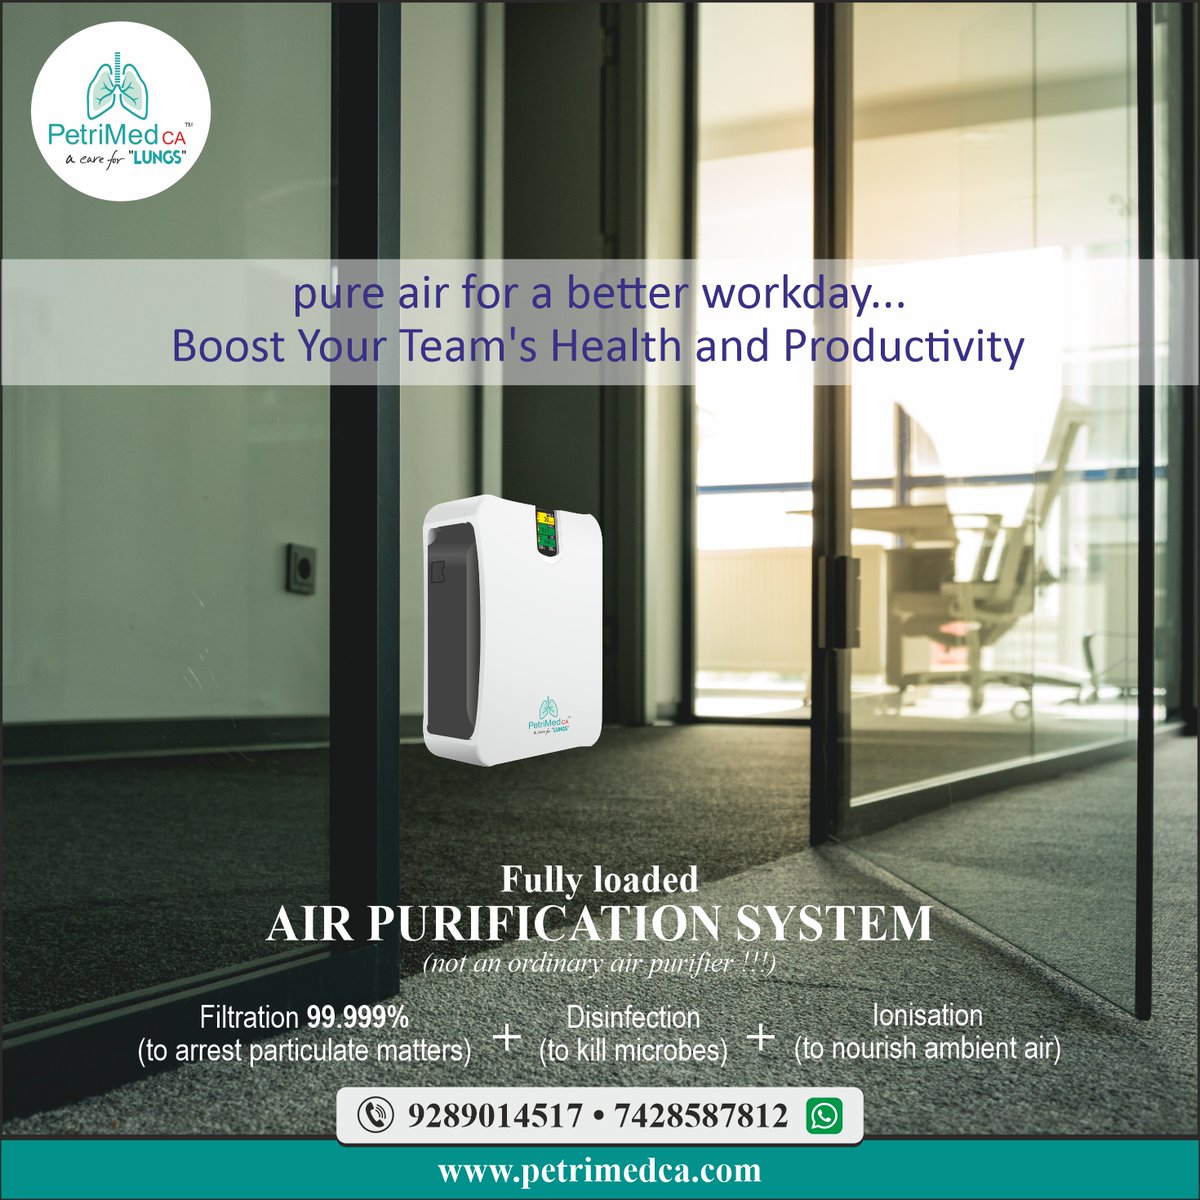 Our air purification system, engineered to filter 99.999% of pollutants, can create a healthy workplace in your office to help your employees breathe easy and work comfortably. 
#cleanair #airquality #healthylife #healthcareproducts #airpollution #indoorairpurifier